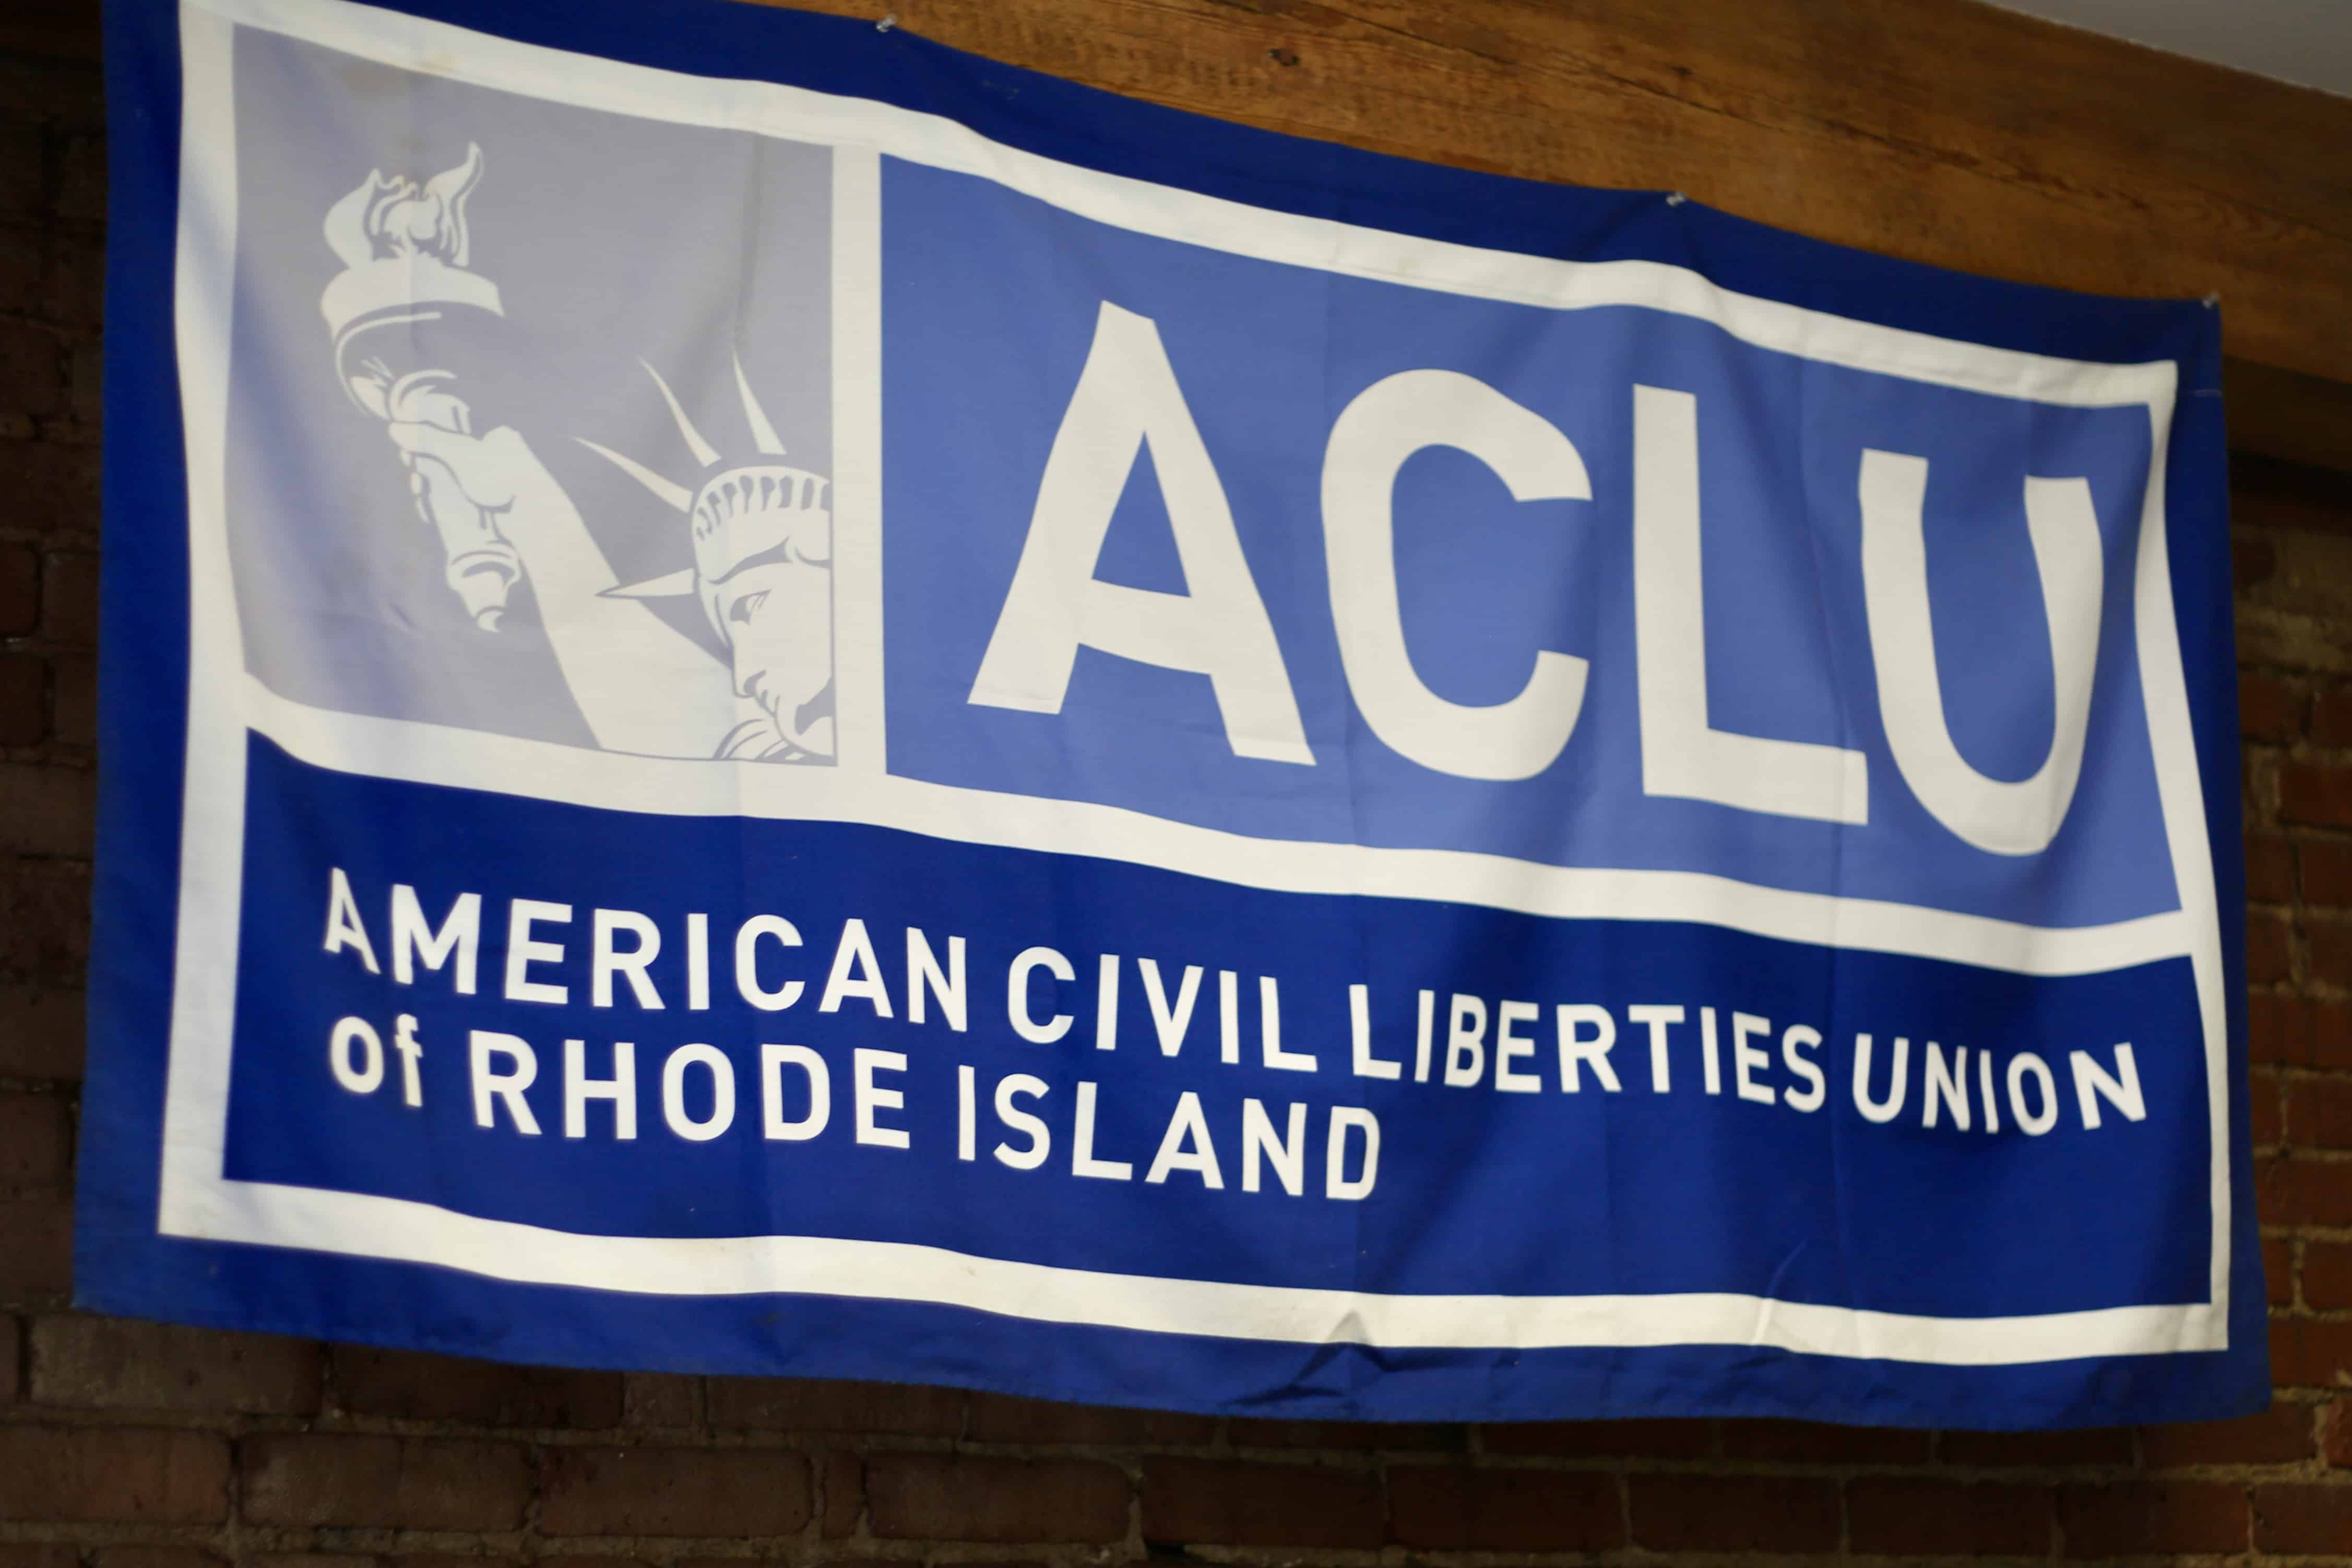 Rhode Island: ACLU files brief challenging legality of lengthy solitary confinement at the ACI